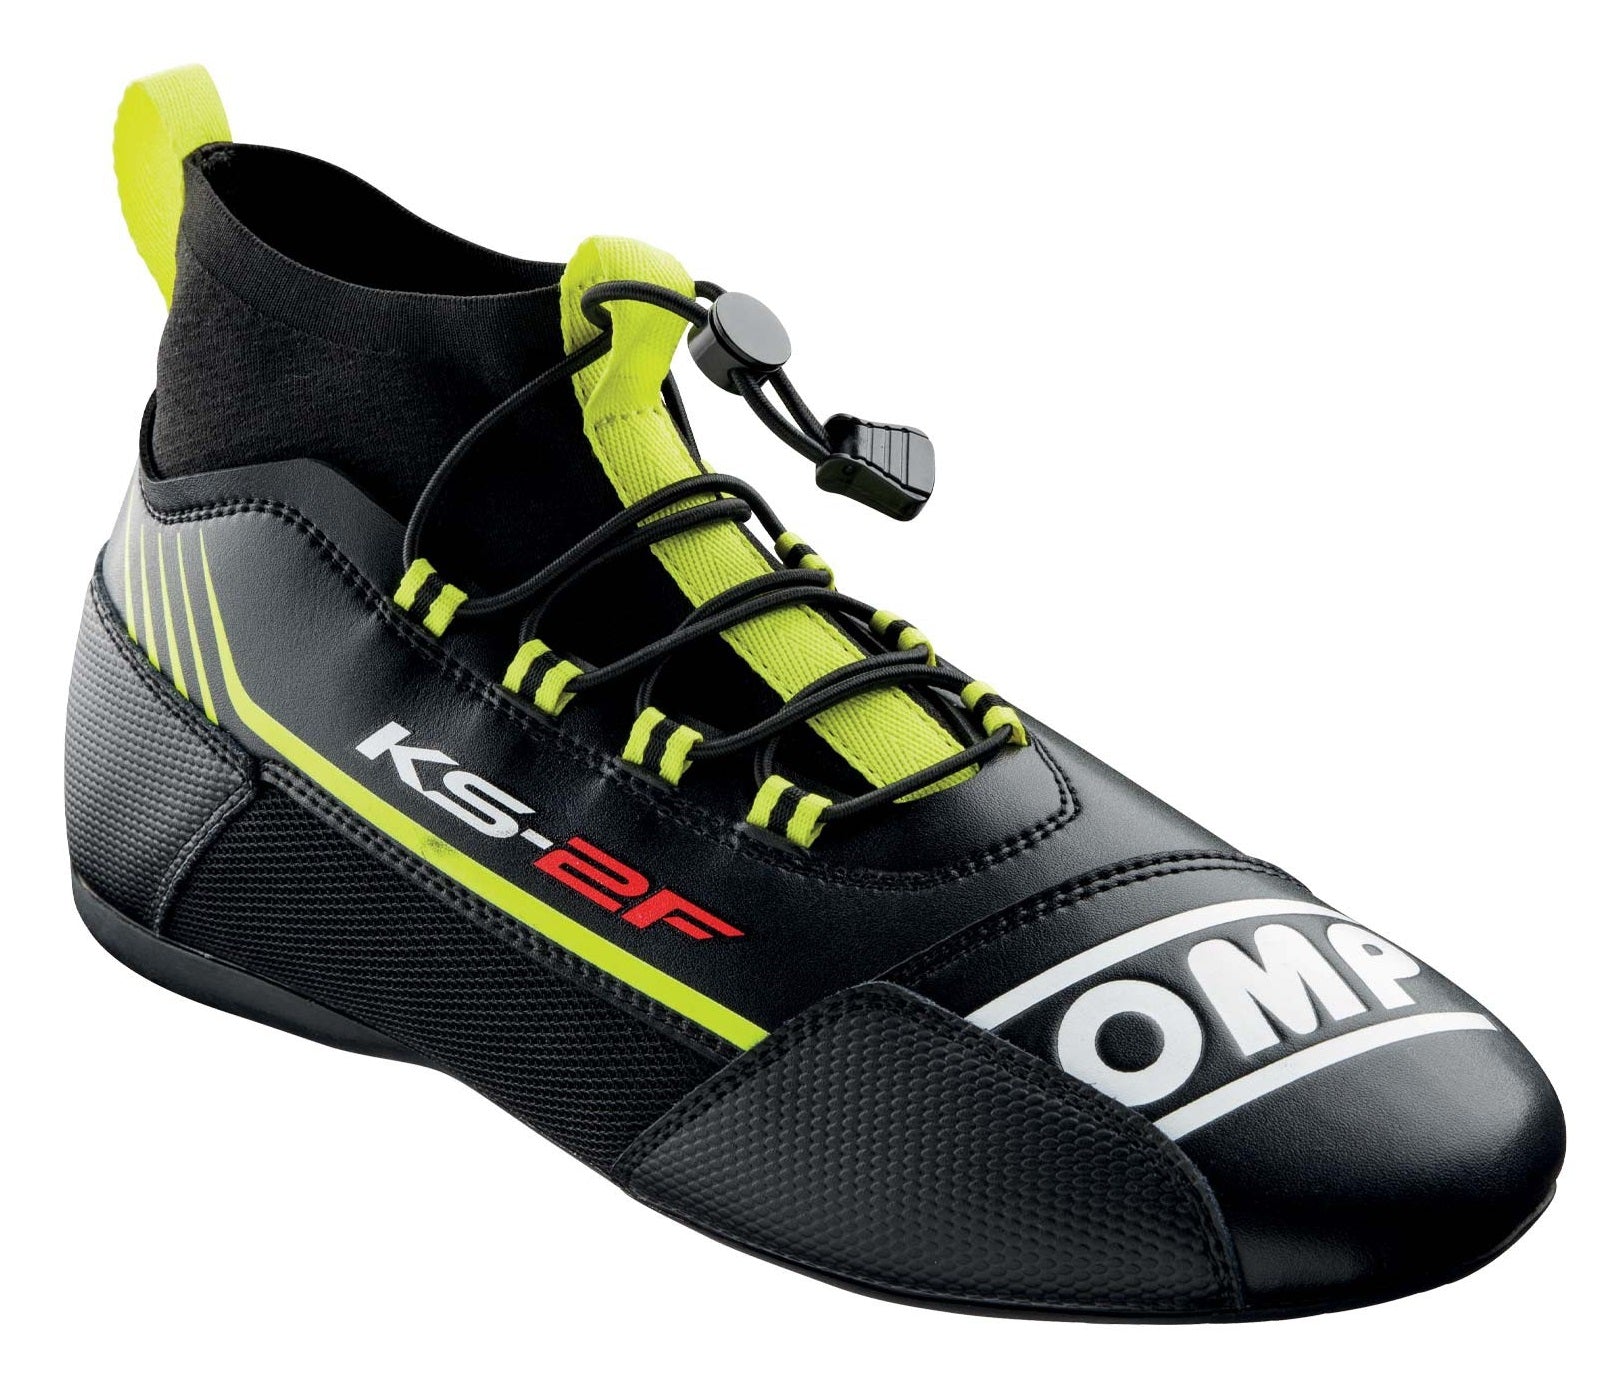 OMP KC0-0830-A01-178-36 KS-2F Karting shoes, black/fluo yellow, size 36 Photo-0 